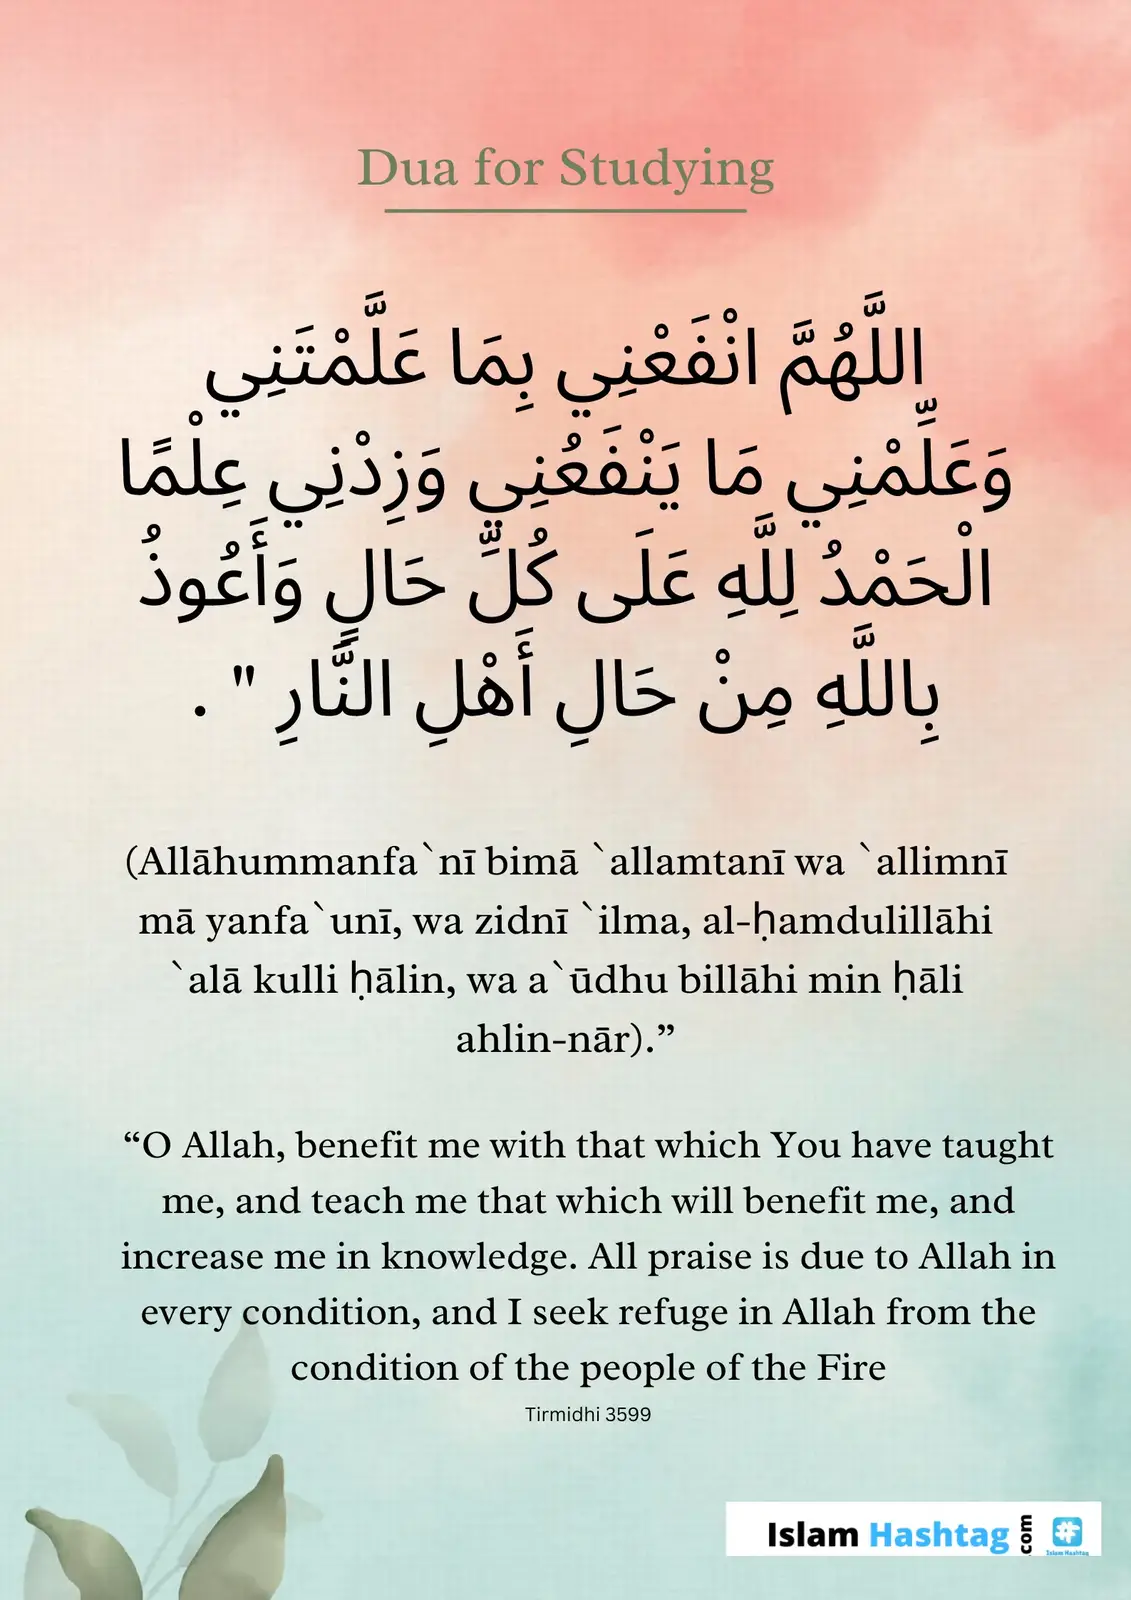 dua for studying poster